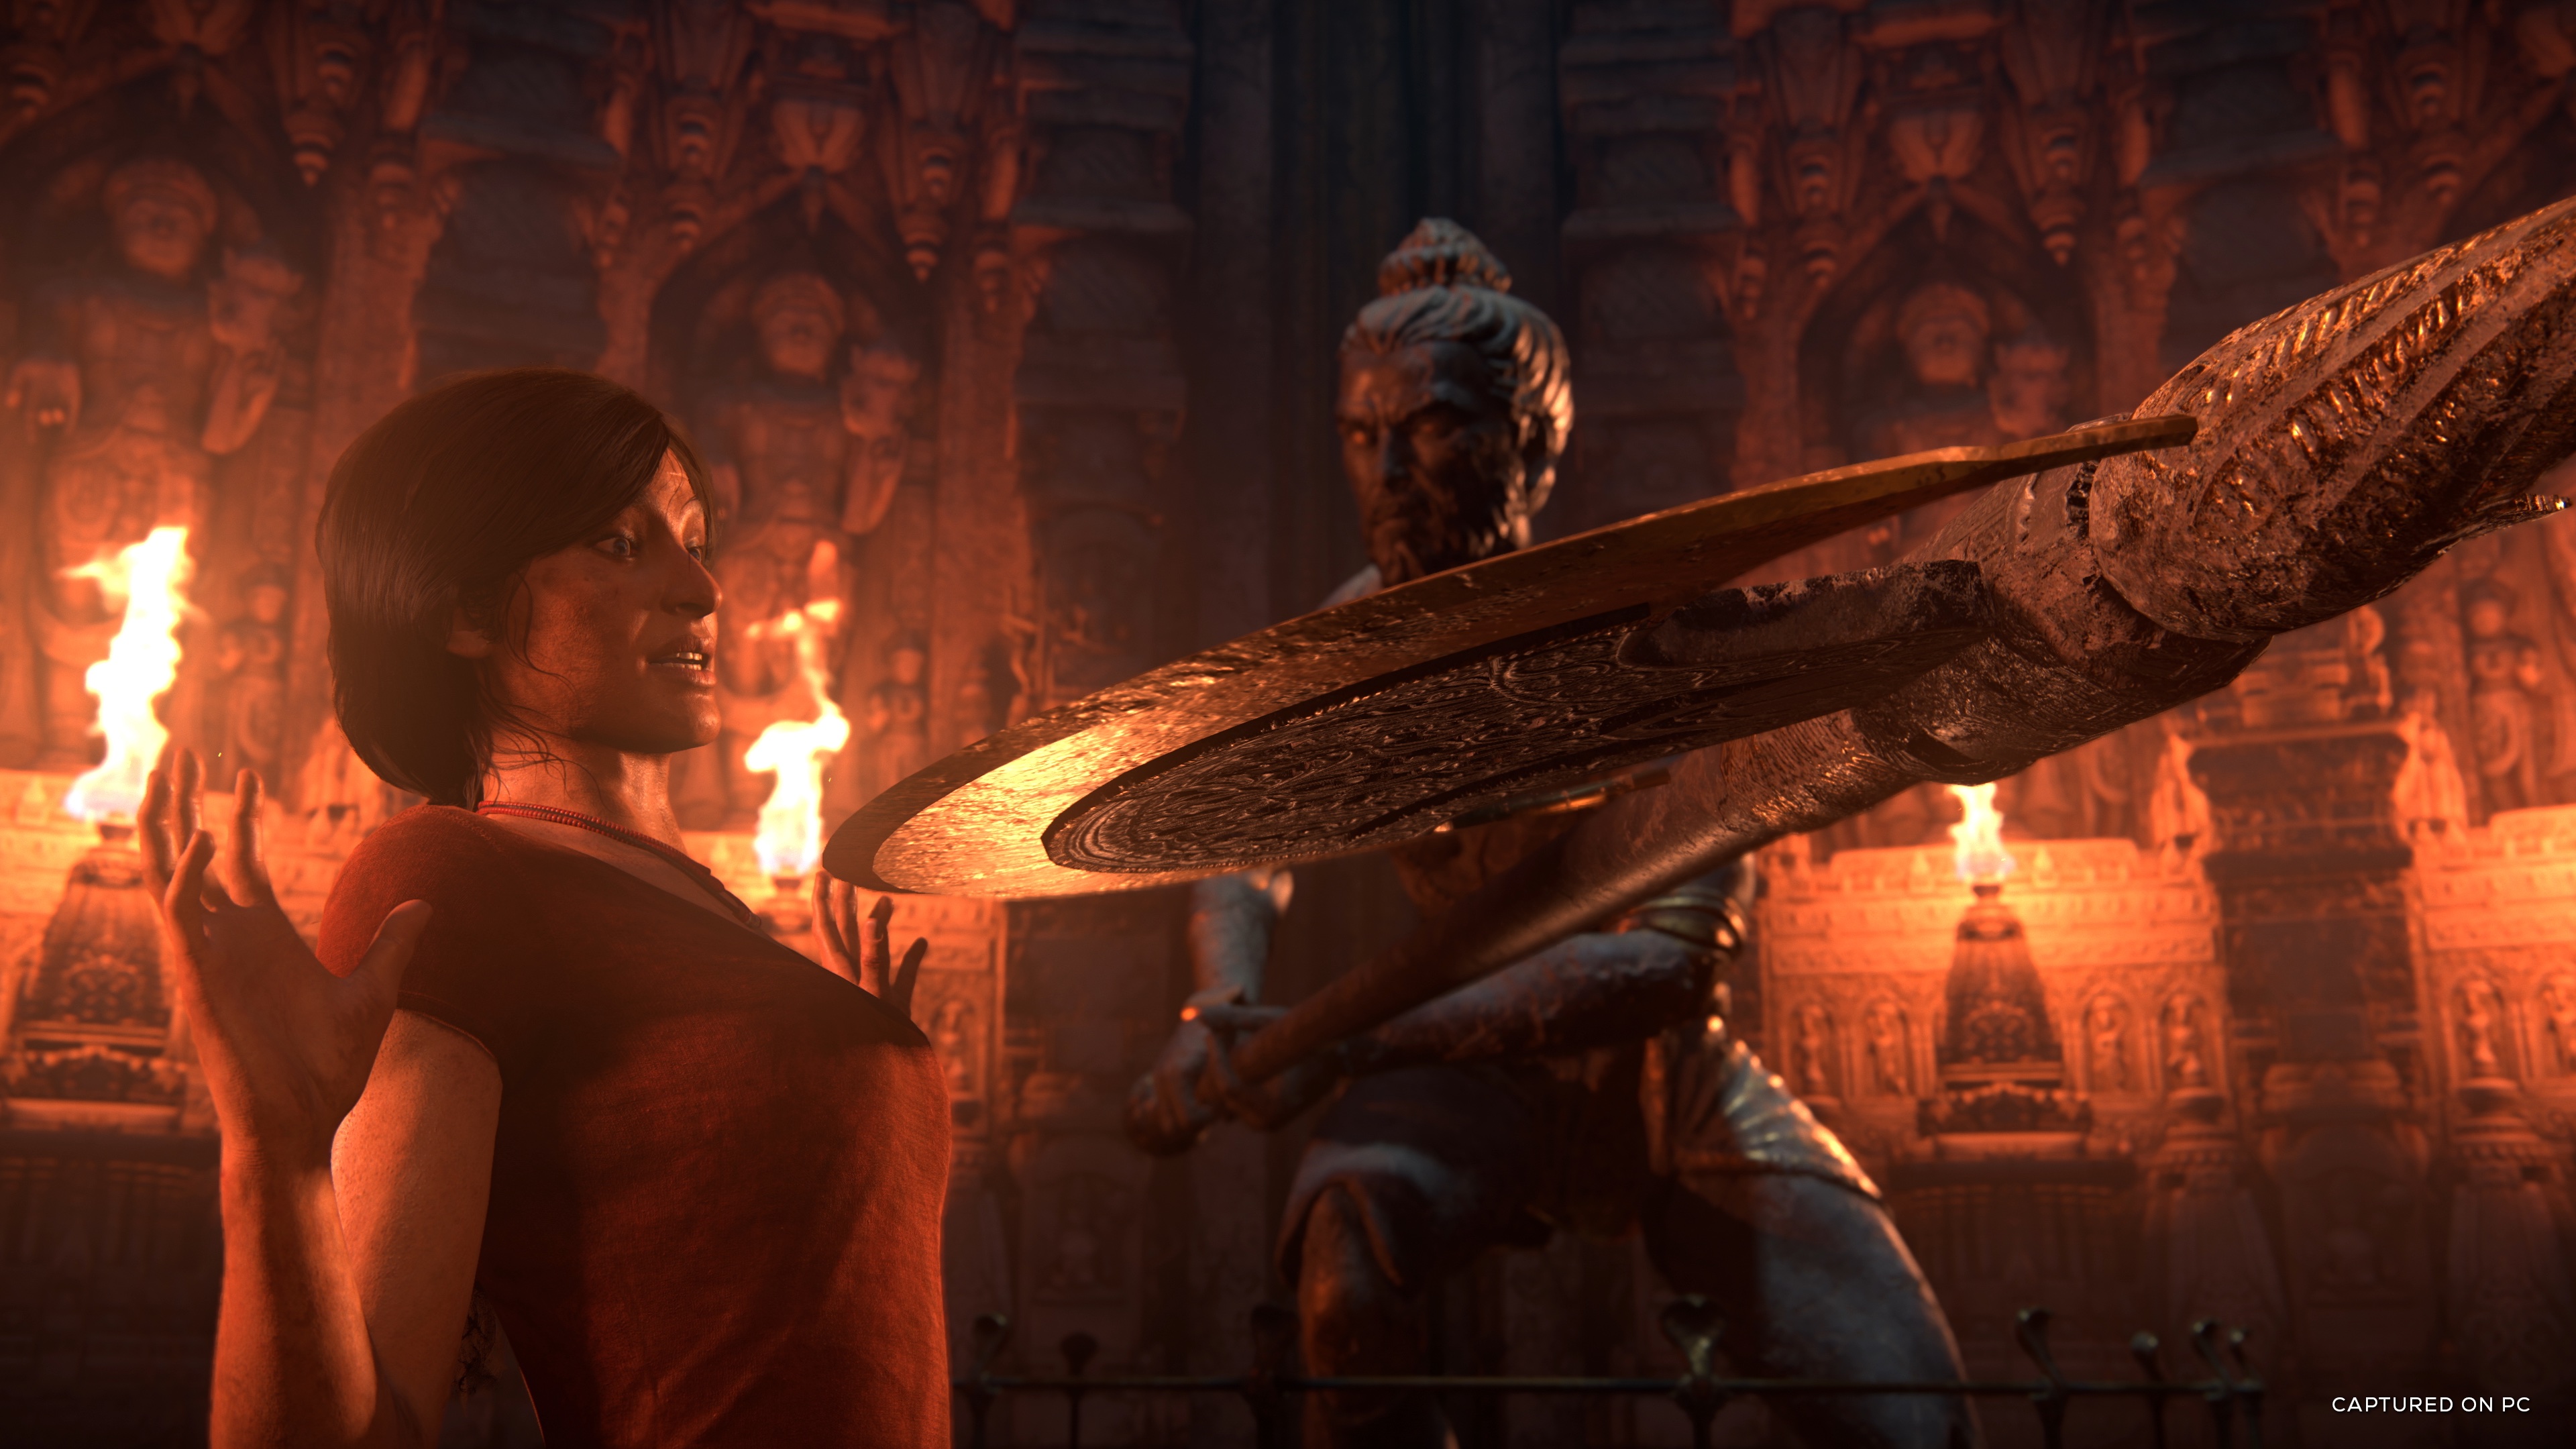 Uncharted: Legacy of Thieves Collection launches in October on PC